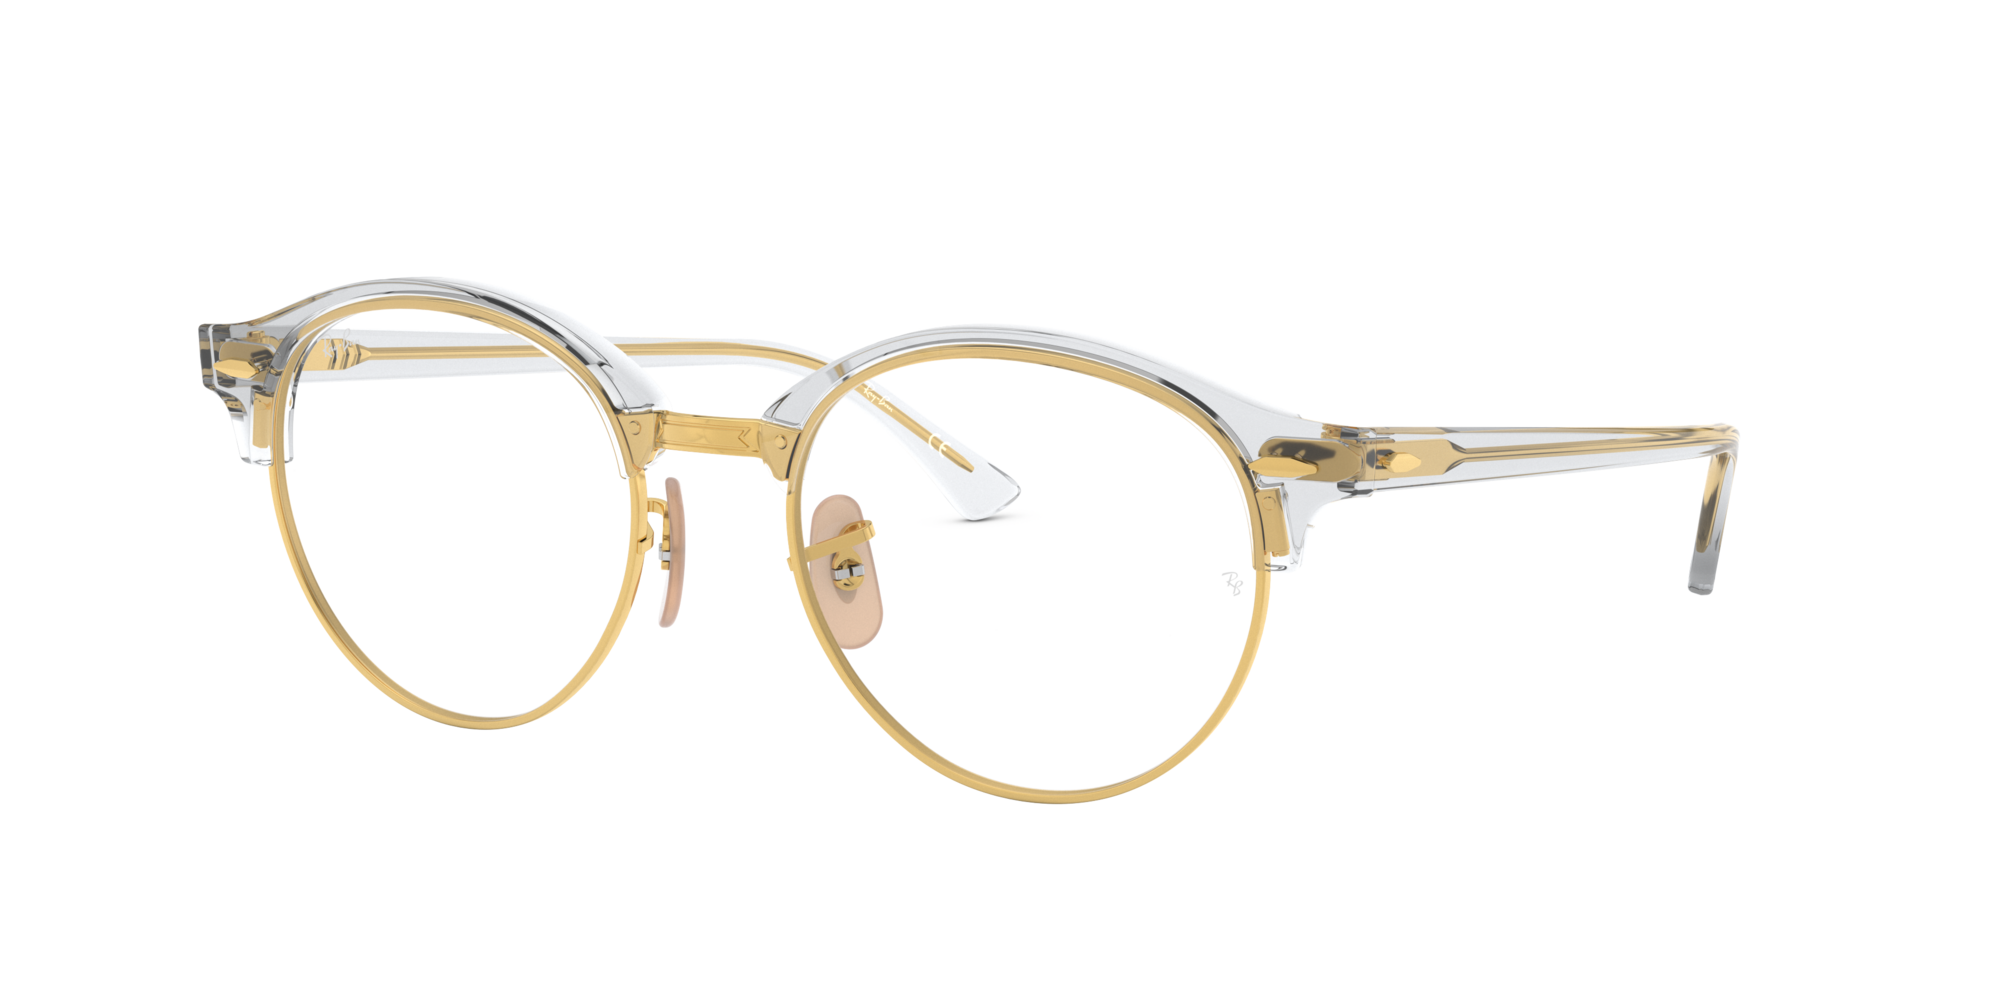 Ray Ban 0rx4246v Glasses In Clear White Target Optical